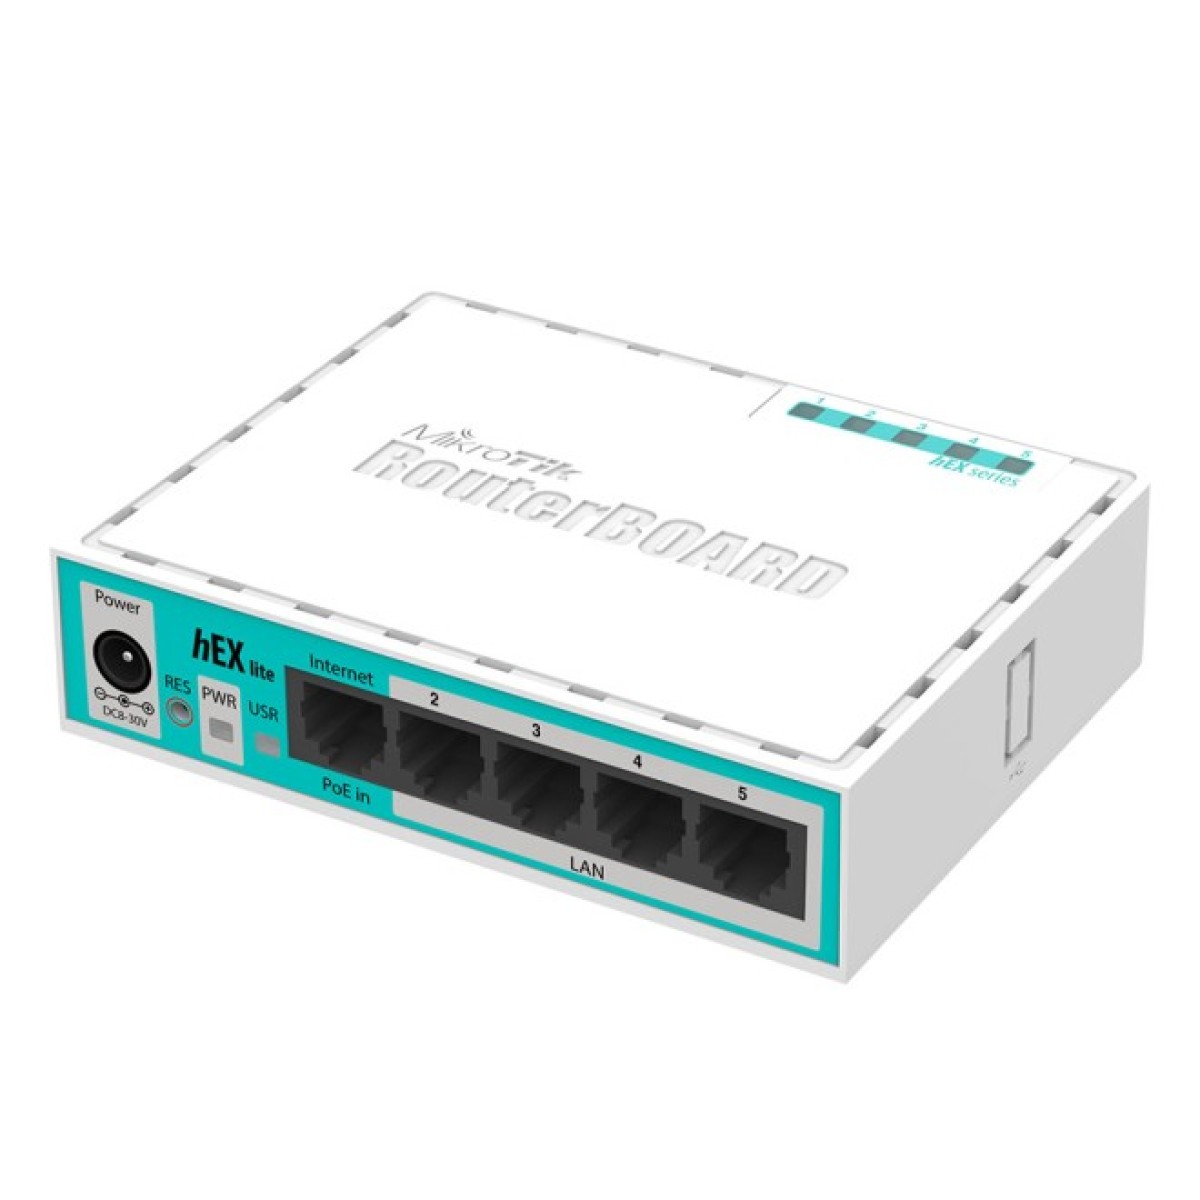 Маршрутизатор MIKROTIK RouterBOARD RB750r2 hEX lite 256_256.jpg